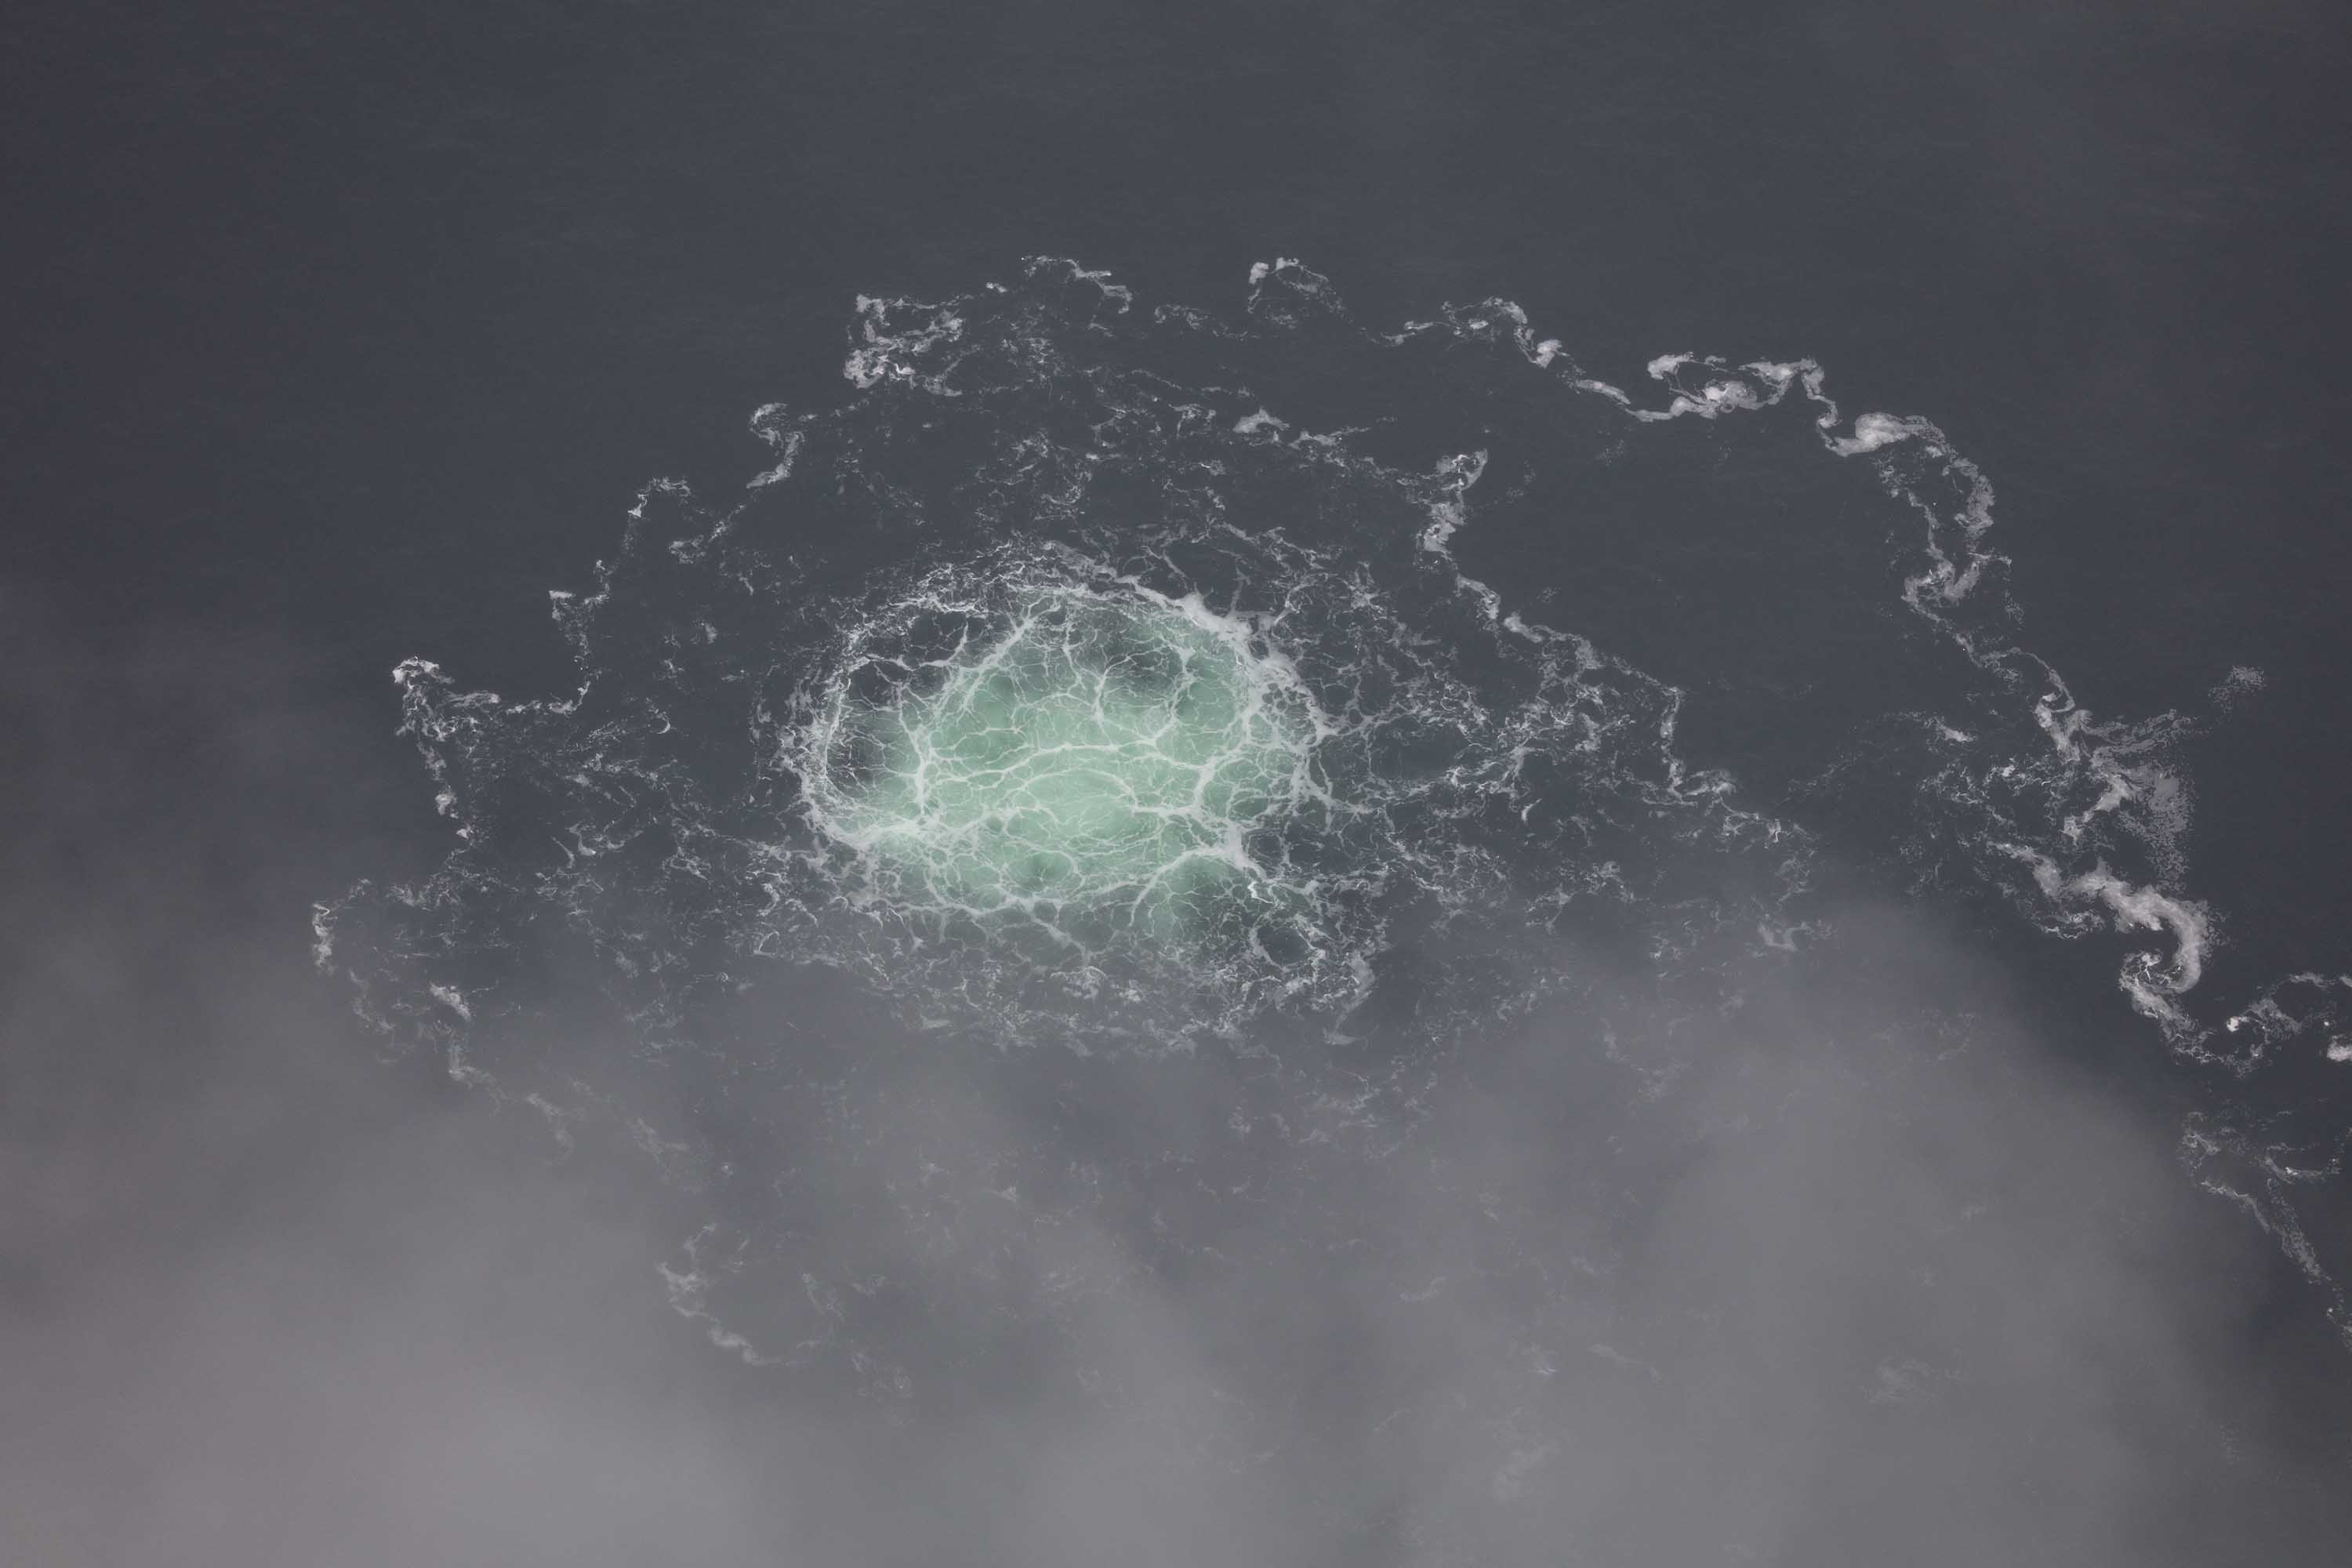 The release of gas is seen bubbling on the surface of the Baltic Sea from a leak on the Nord Stream 2 gas pipeline, on September 28, 2022, in a handout photo provided by the Swedish Coast Guard.